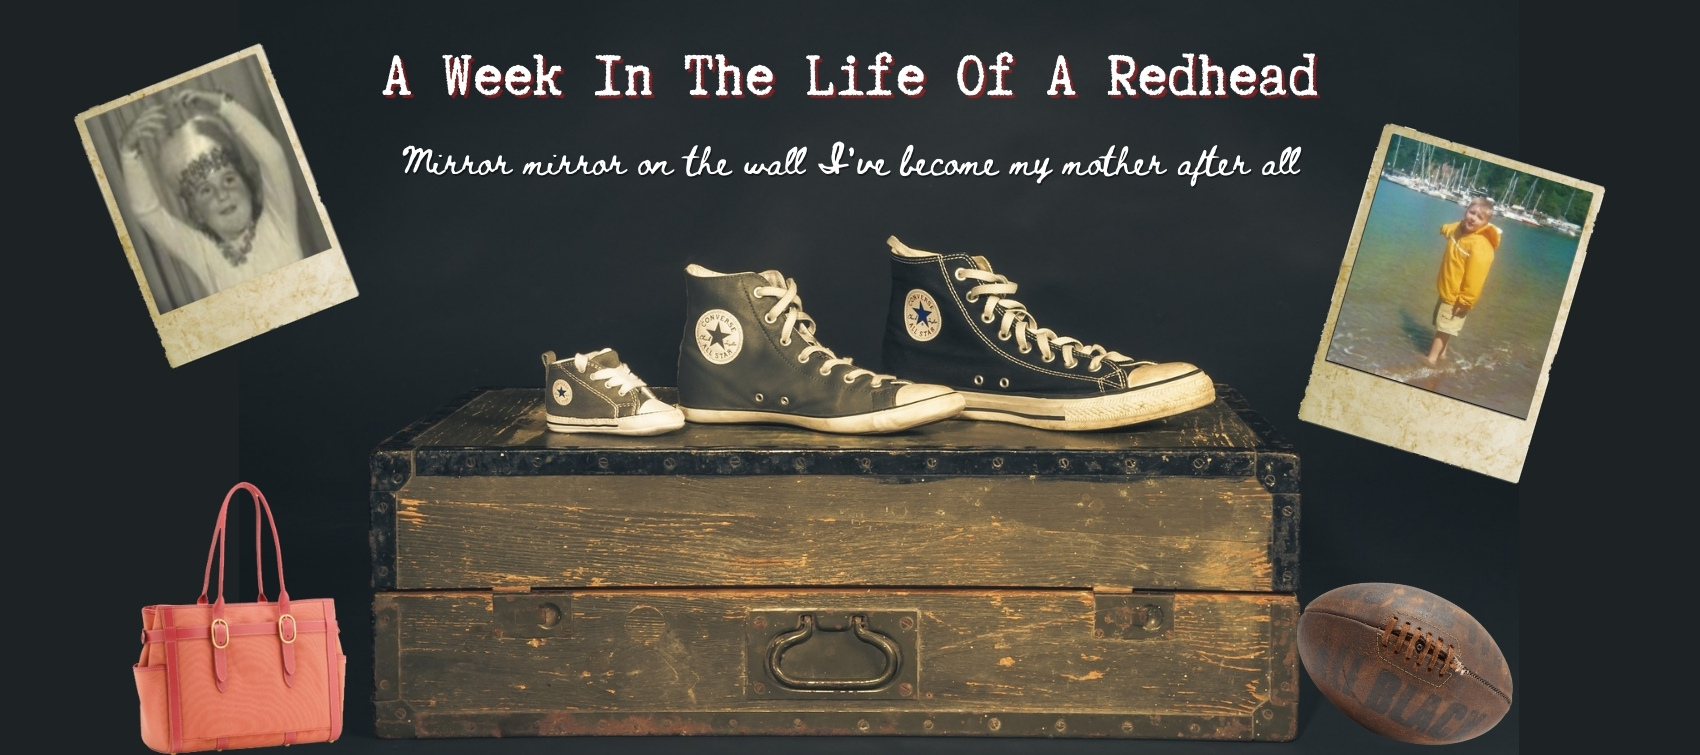 A Week In The Life of a Redhead